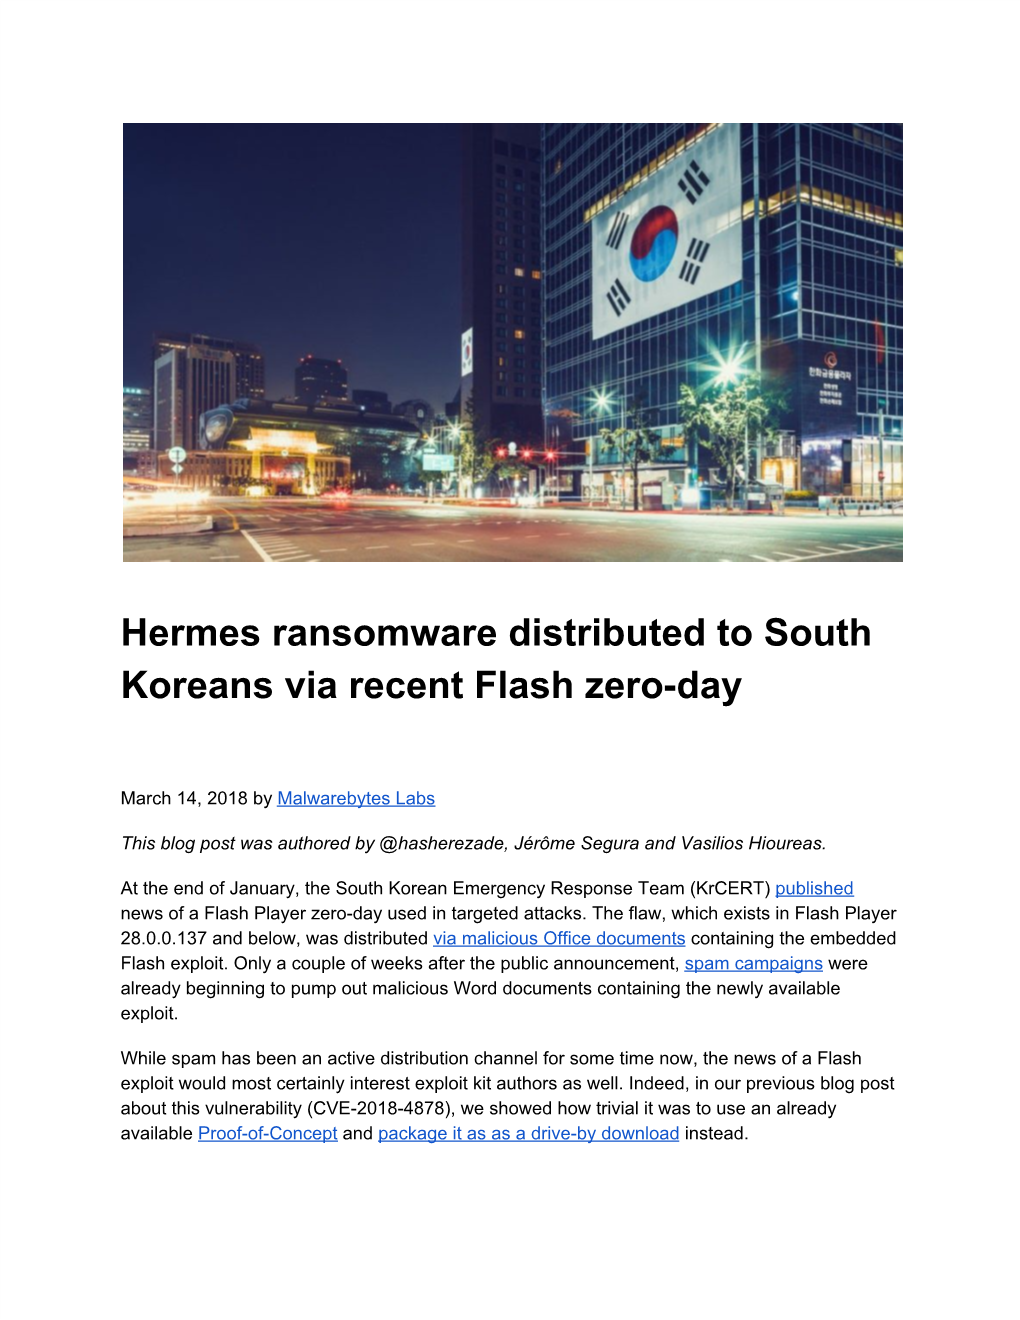 Hermes Ransomware Distributed to South Koreans Via Recent Flash Zero-Day